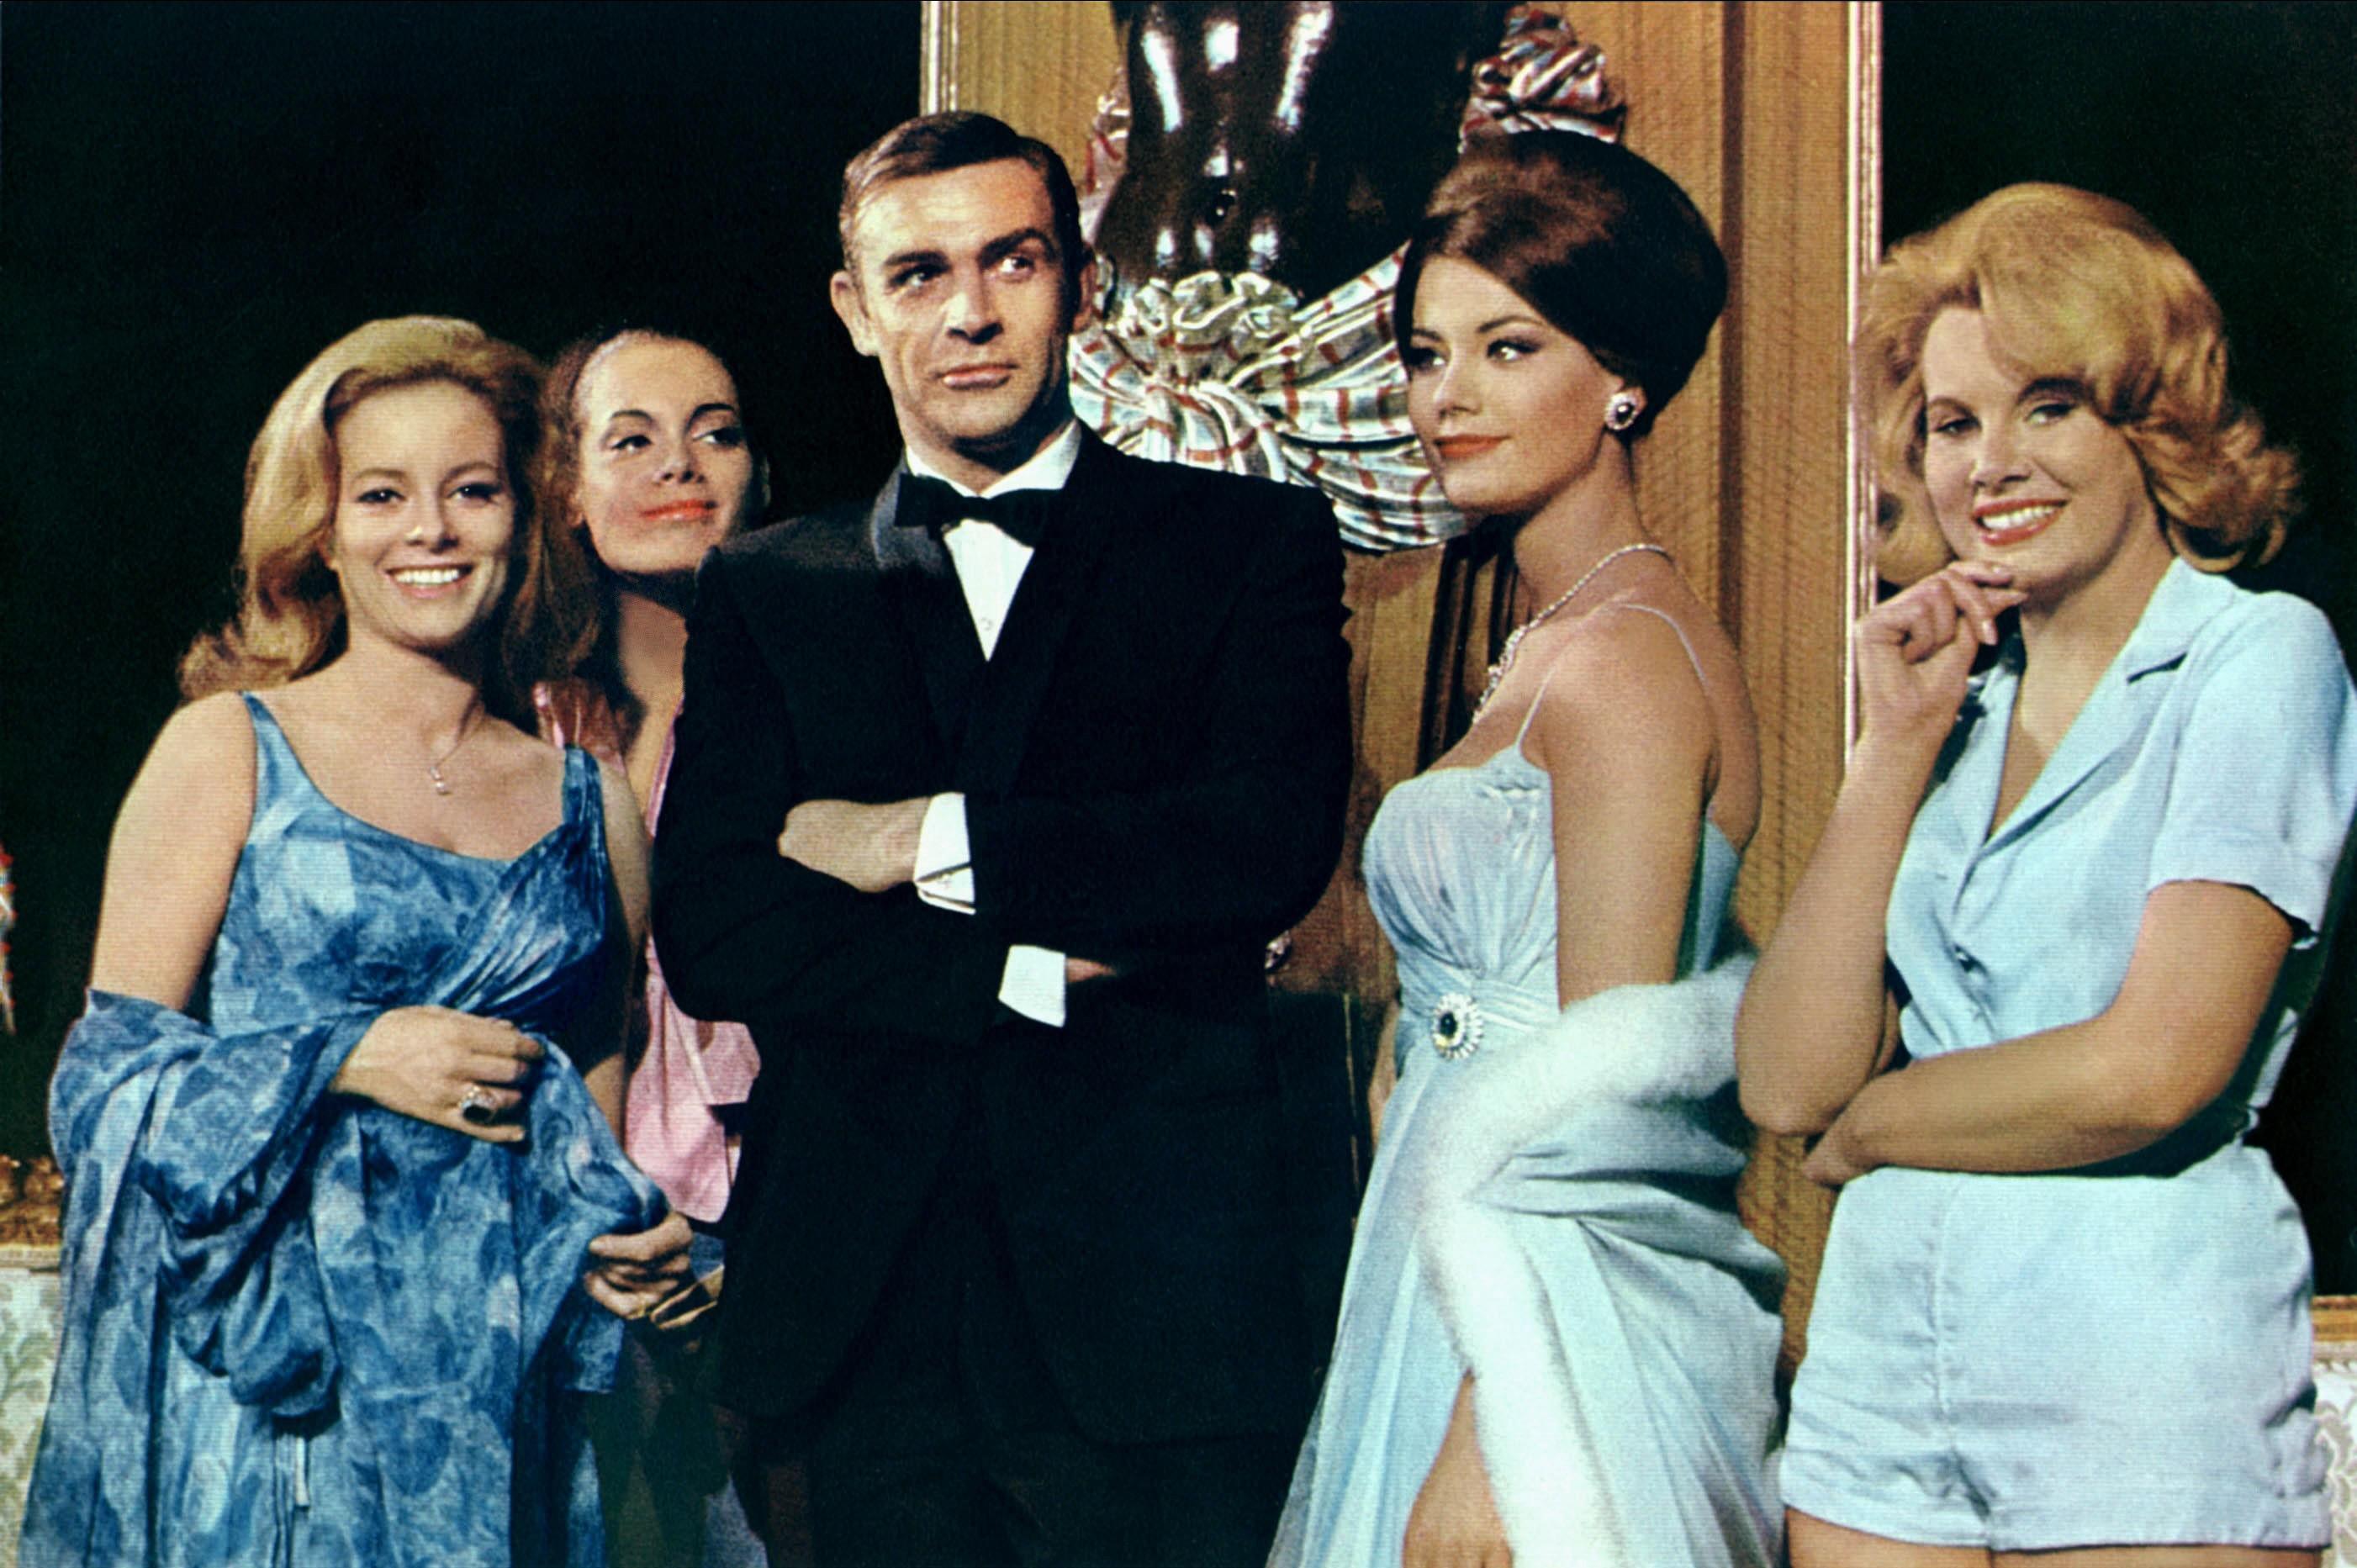 Sexist dinosaur? Sean Connery as 007 with his ‘Bond girls’ in ‘Thunderball’, 1965